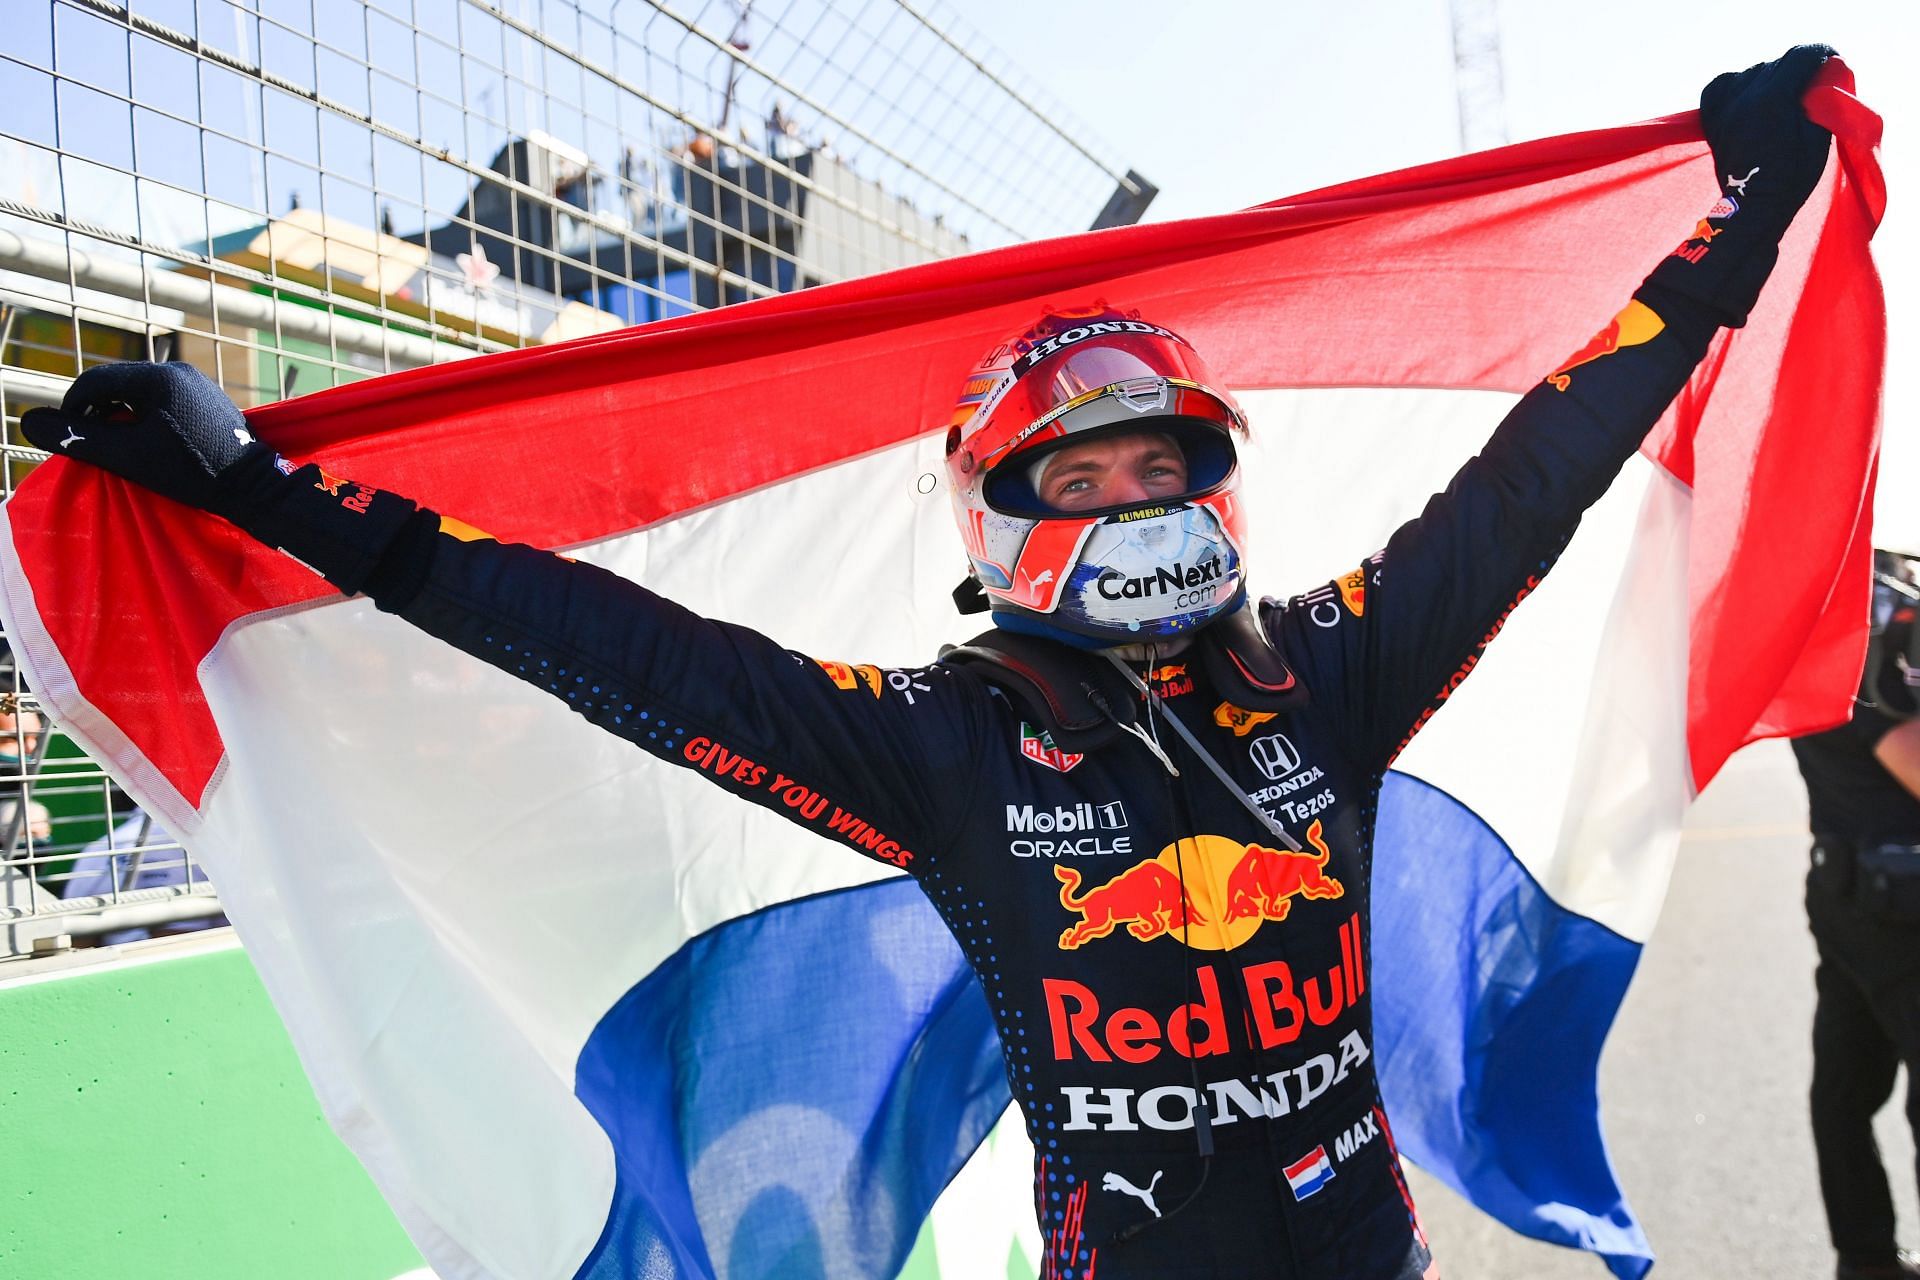 F1 Grand Prix of The Netherlands - Max Verstappen wins his home race.